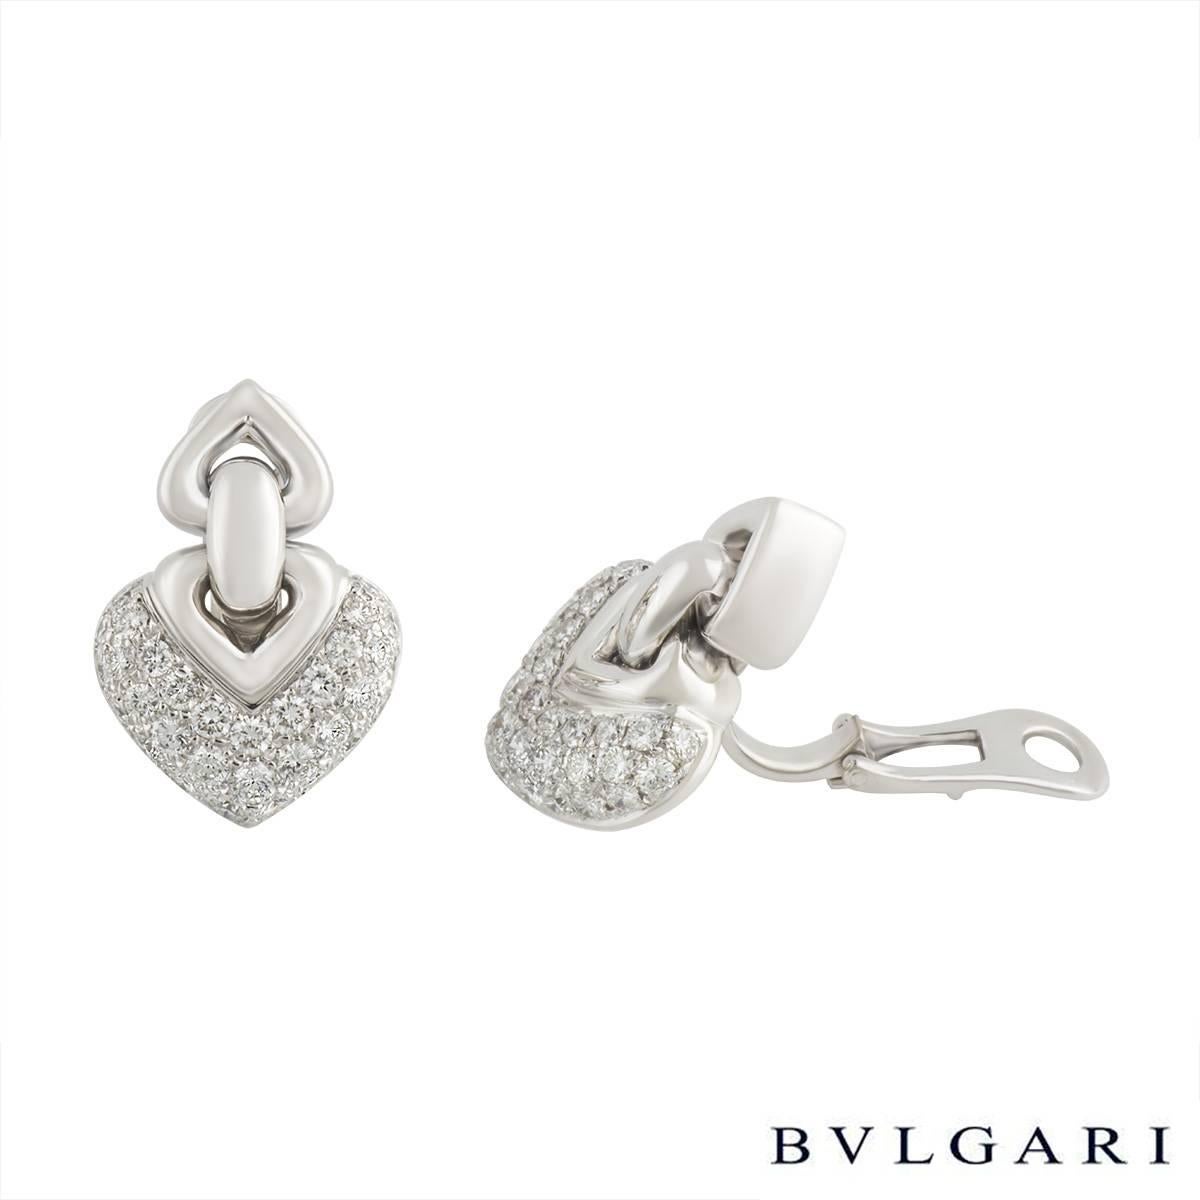 An iconic pair of Bvlgari 18k white gold pave diamond earrings from the Doppio Cuore collection. Each earring consists of an 18k white gold heart shaped drop section which is pave set with 32 round brilliant cut diamonds. This is connected to a